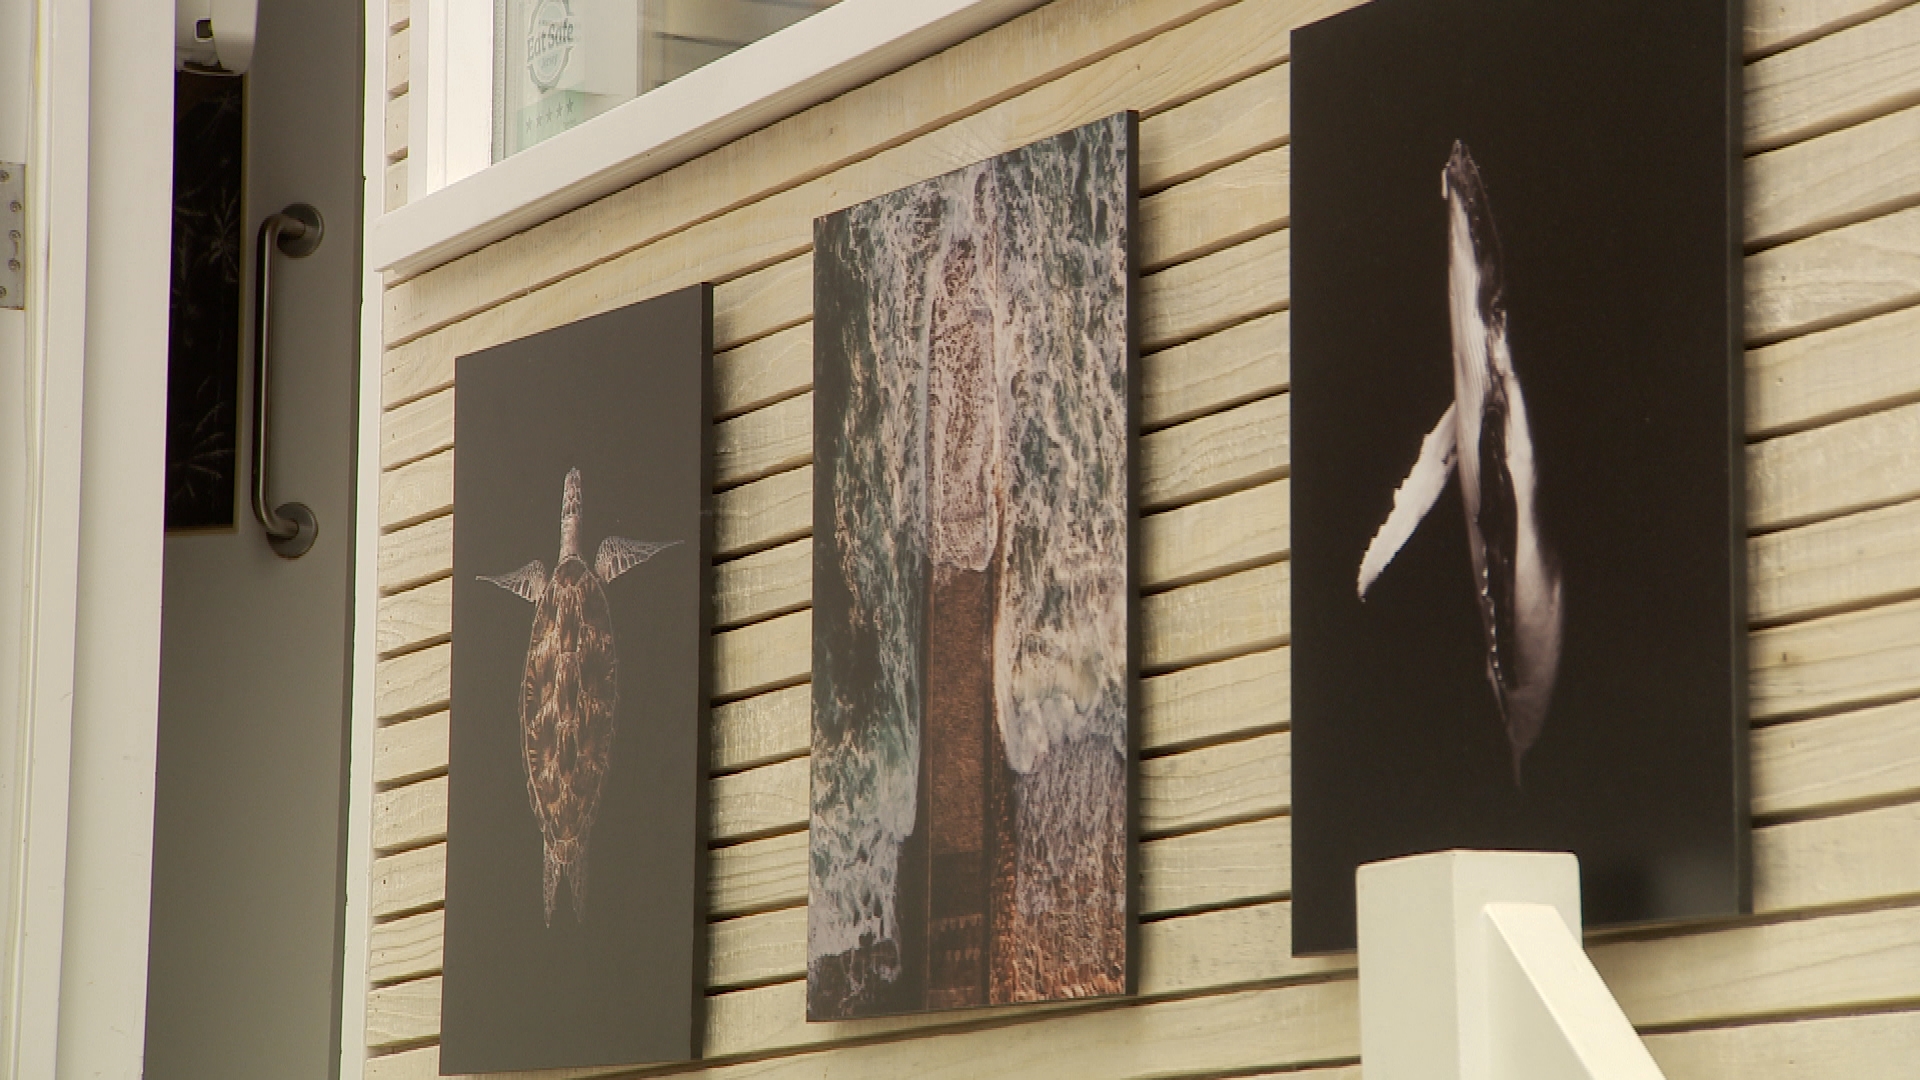 Turning the tides on climate change through exhibitions in Jersey - ITV News